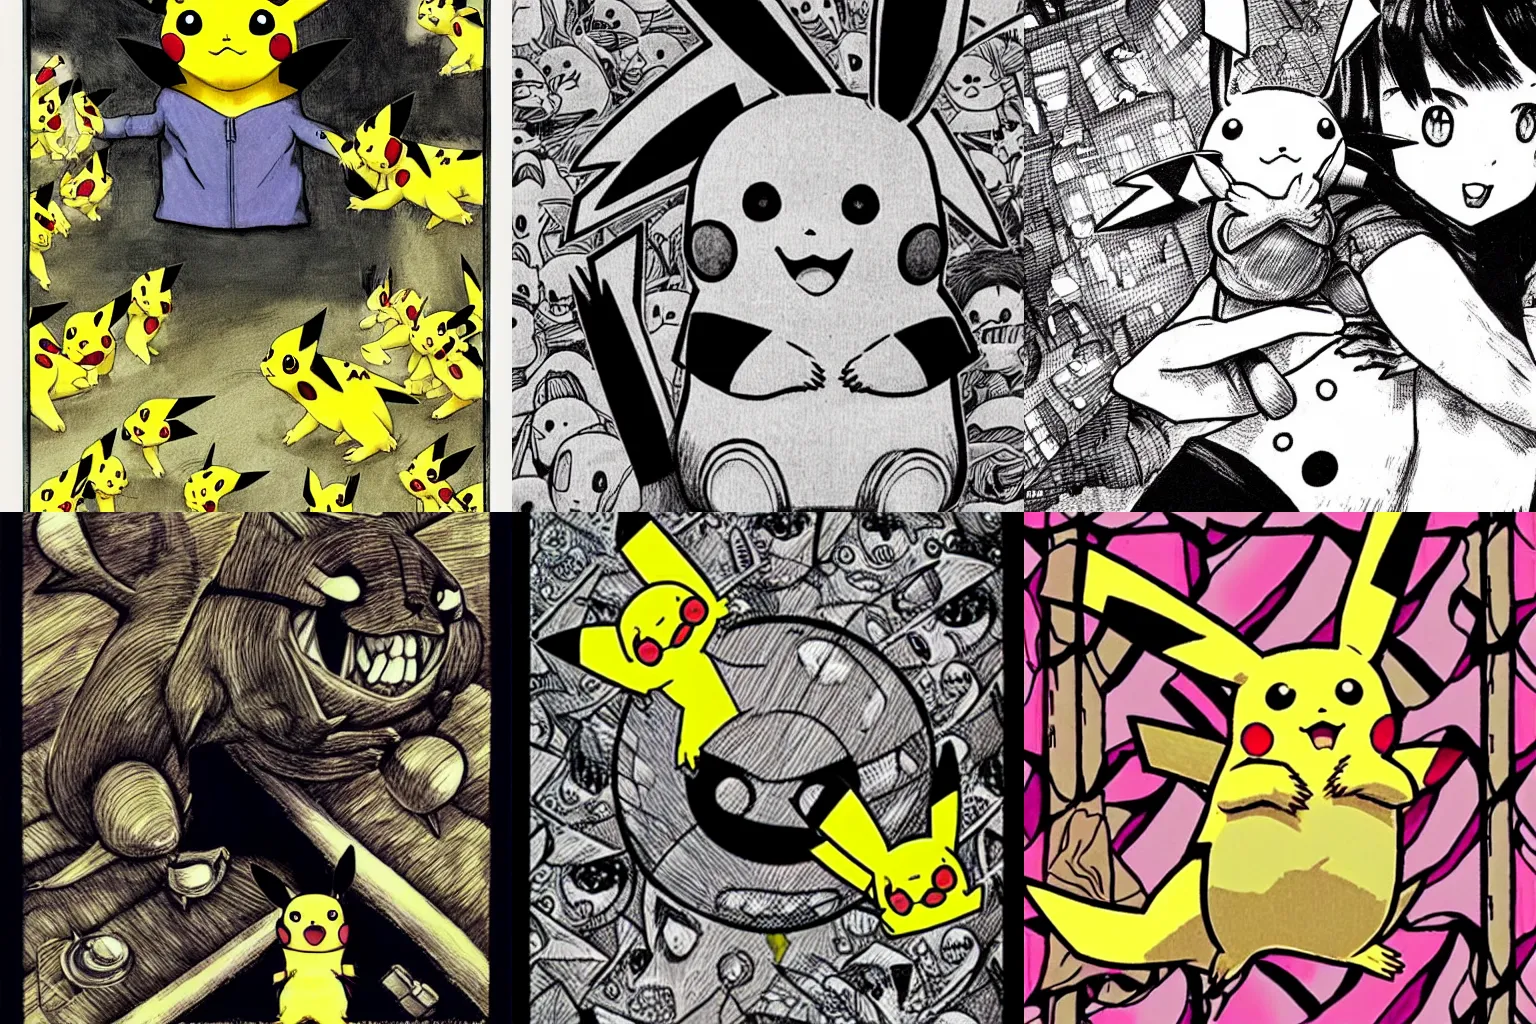 Prompt: Pikachu, art by Junji Ito, extremely detailed